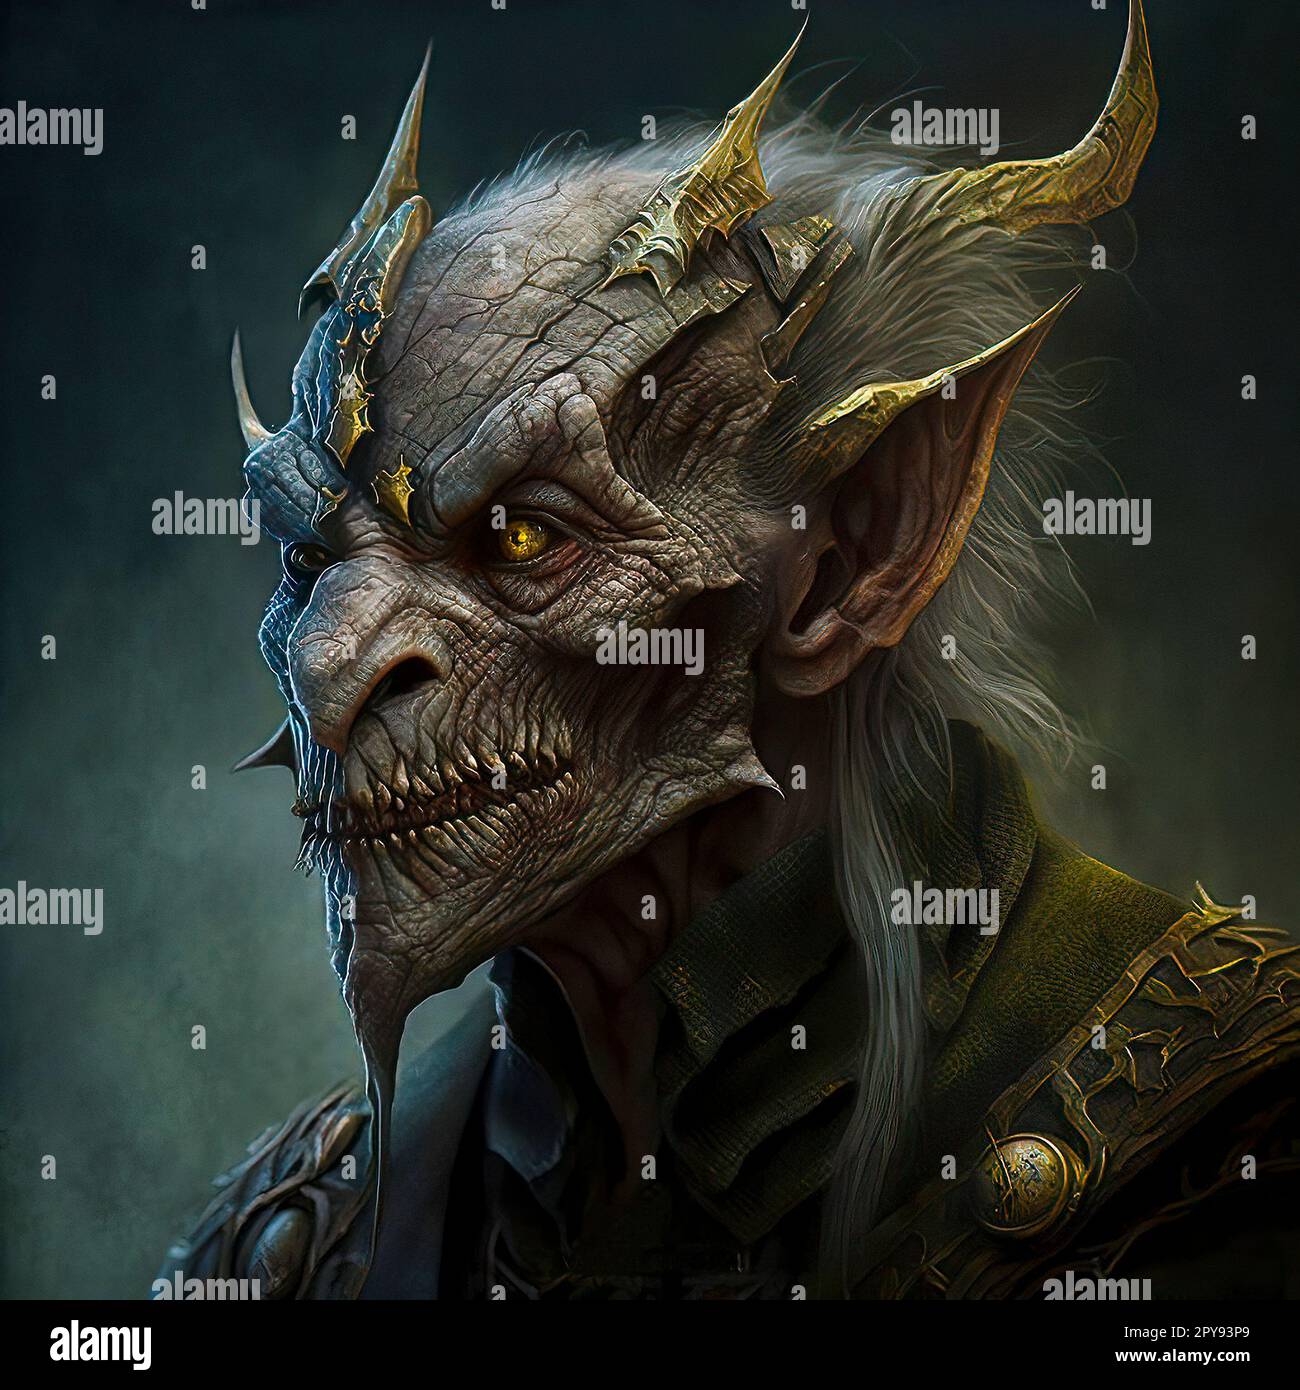 Fantasy Art of an Ominous Goblin with a Sly Smirk, Sinister-looking Eyes, Pointed Ears, and Rough, Textured Features Stock Photo